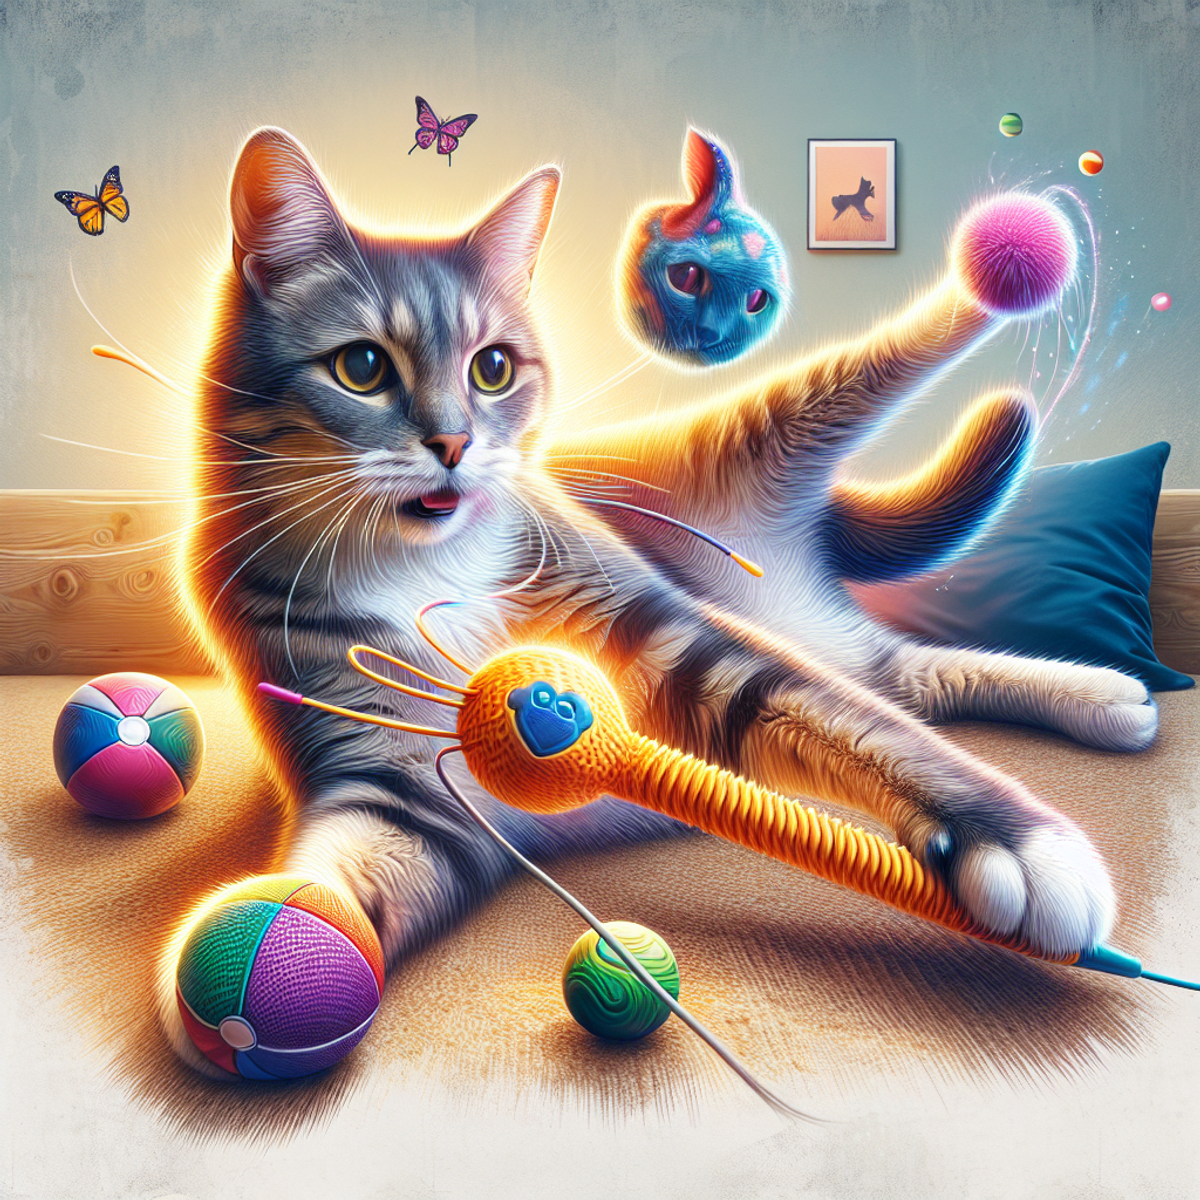 A senior cat plays with a colorful, interactive toy in a cozy home environment.